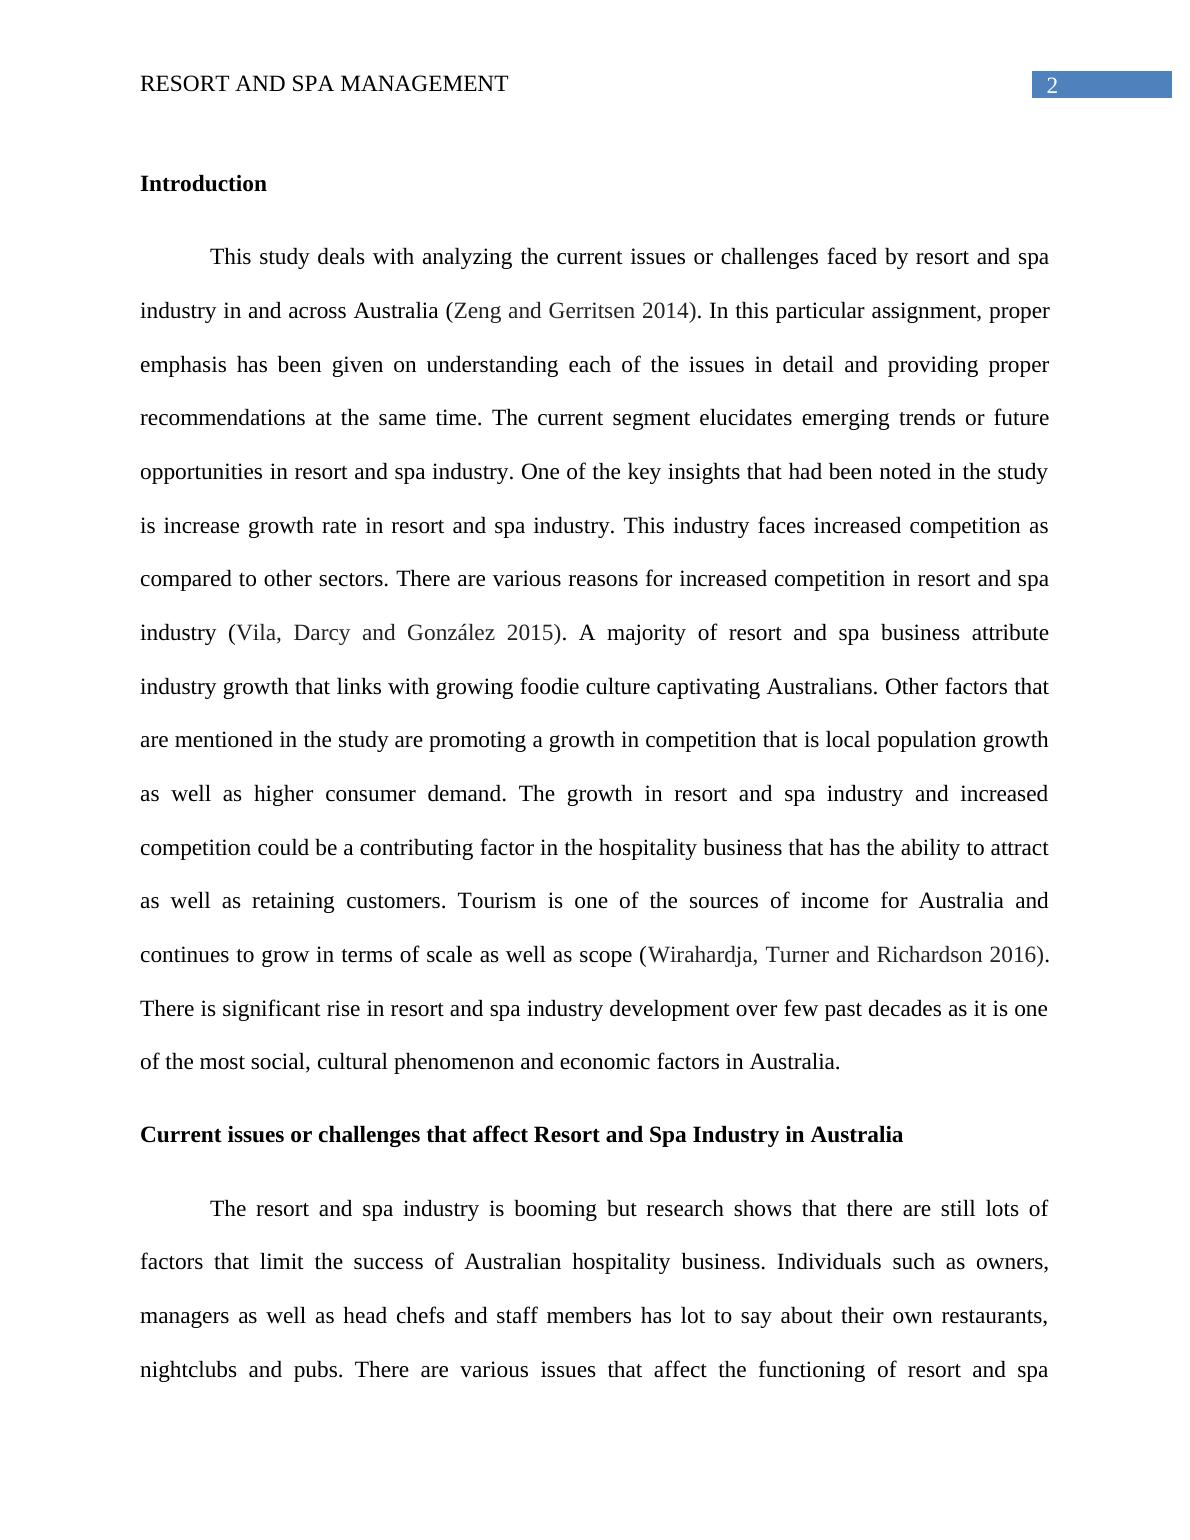 THB 1104 - Resort and Spa Management | Research Paper_2